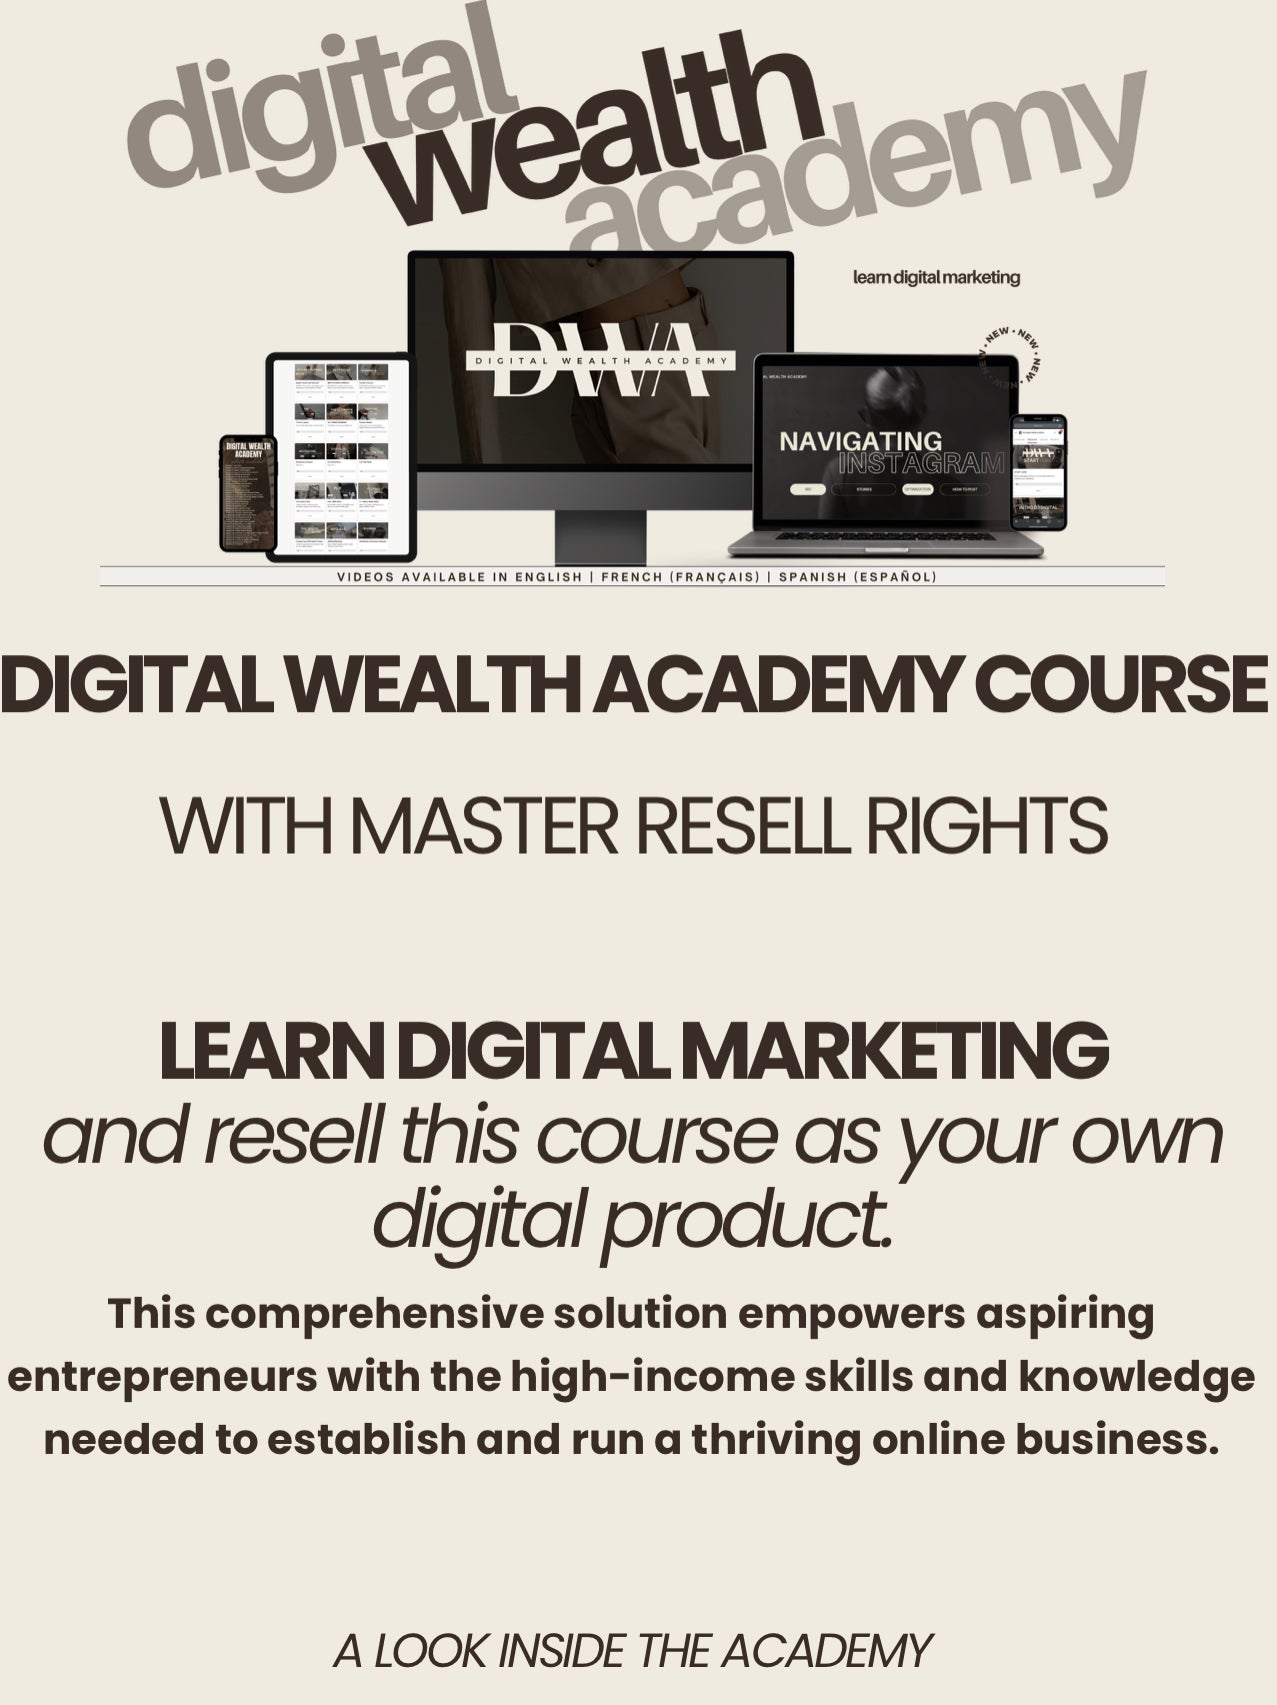 Digital Wealth Academy Course - Digital Product Store